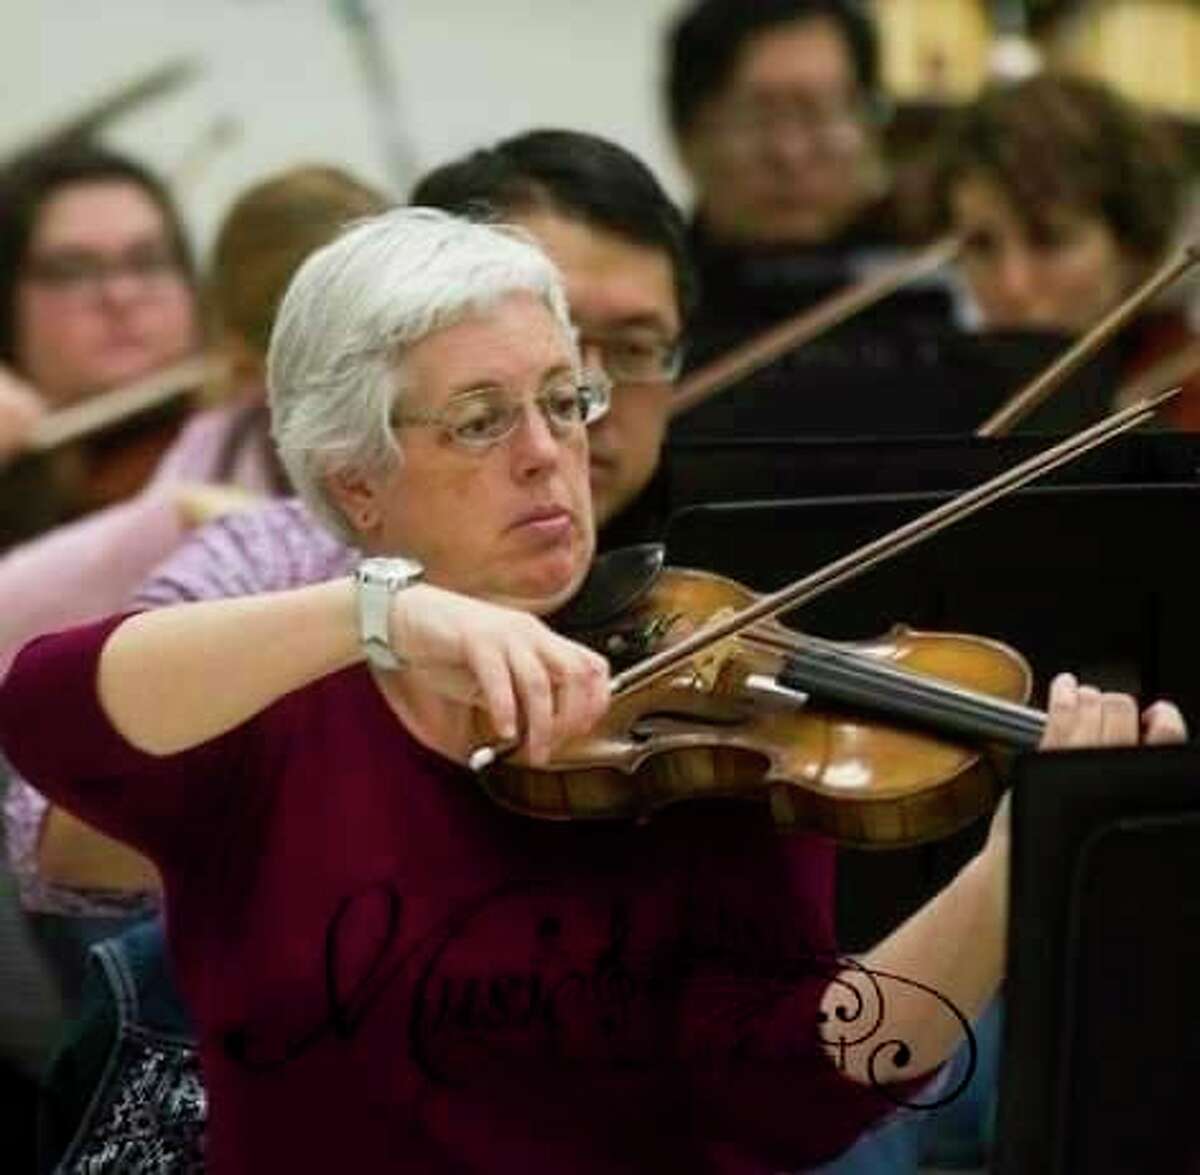 Susan Mercy performs in the orchestra for the event. (Photo provided)